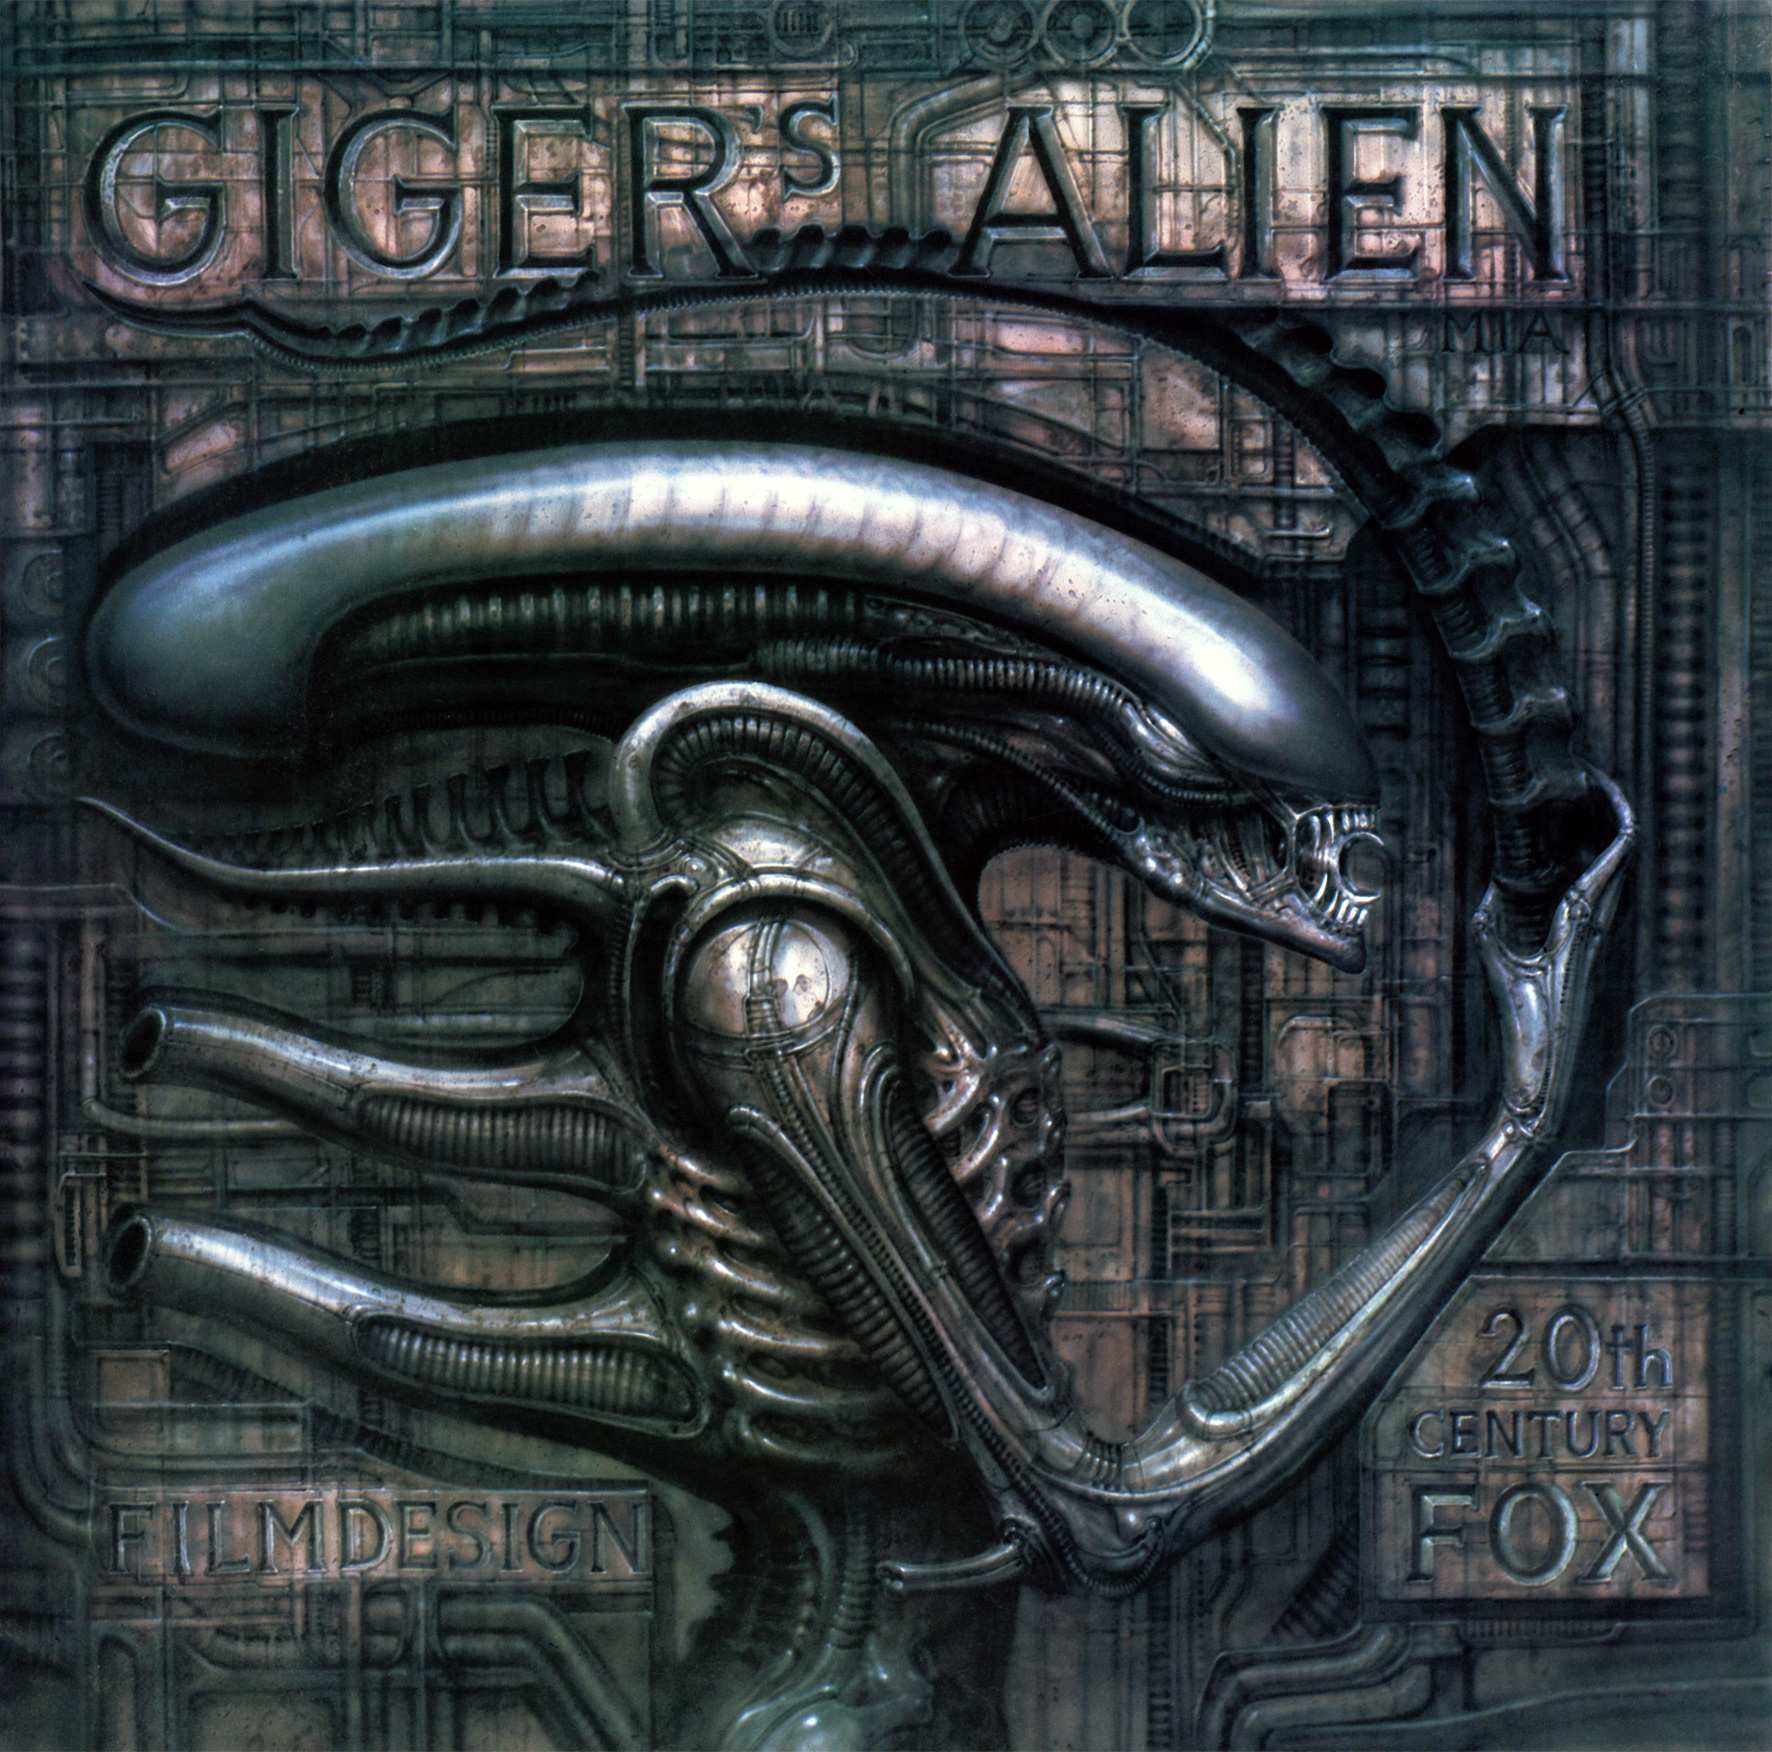 Read online Giger's Alien comic -  Issue # TPB - 1